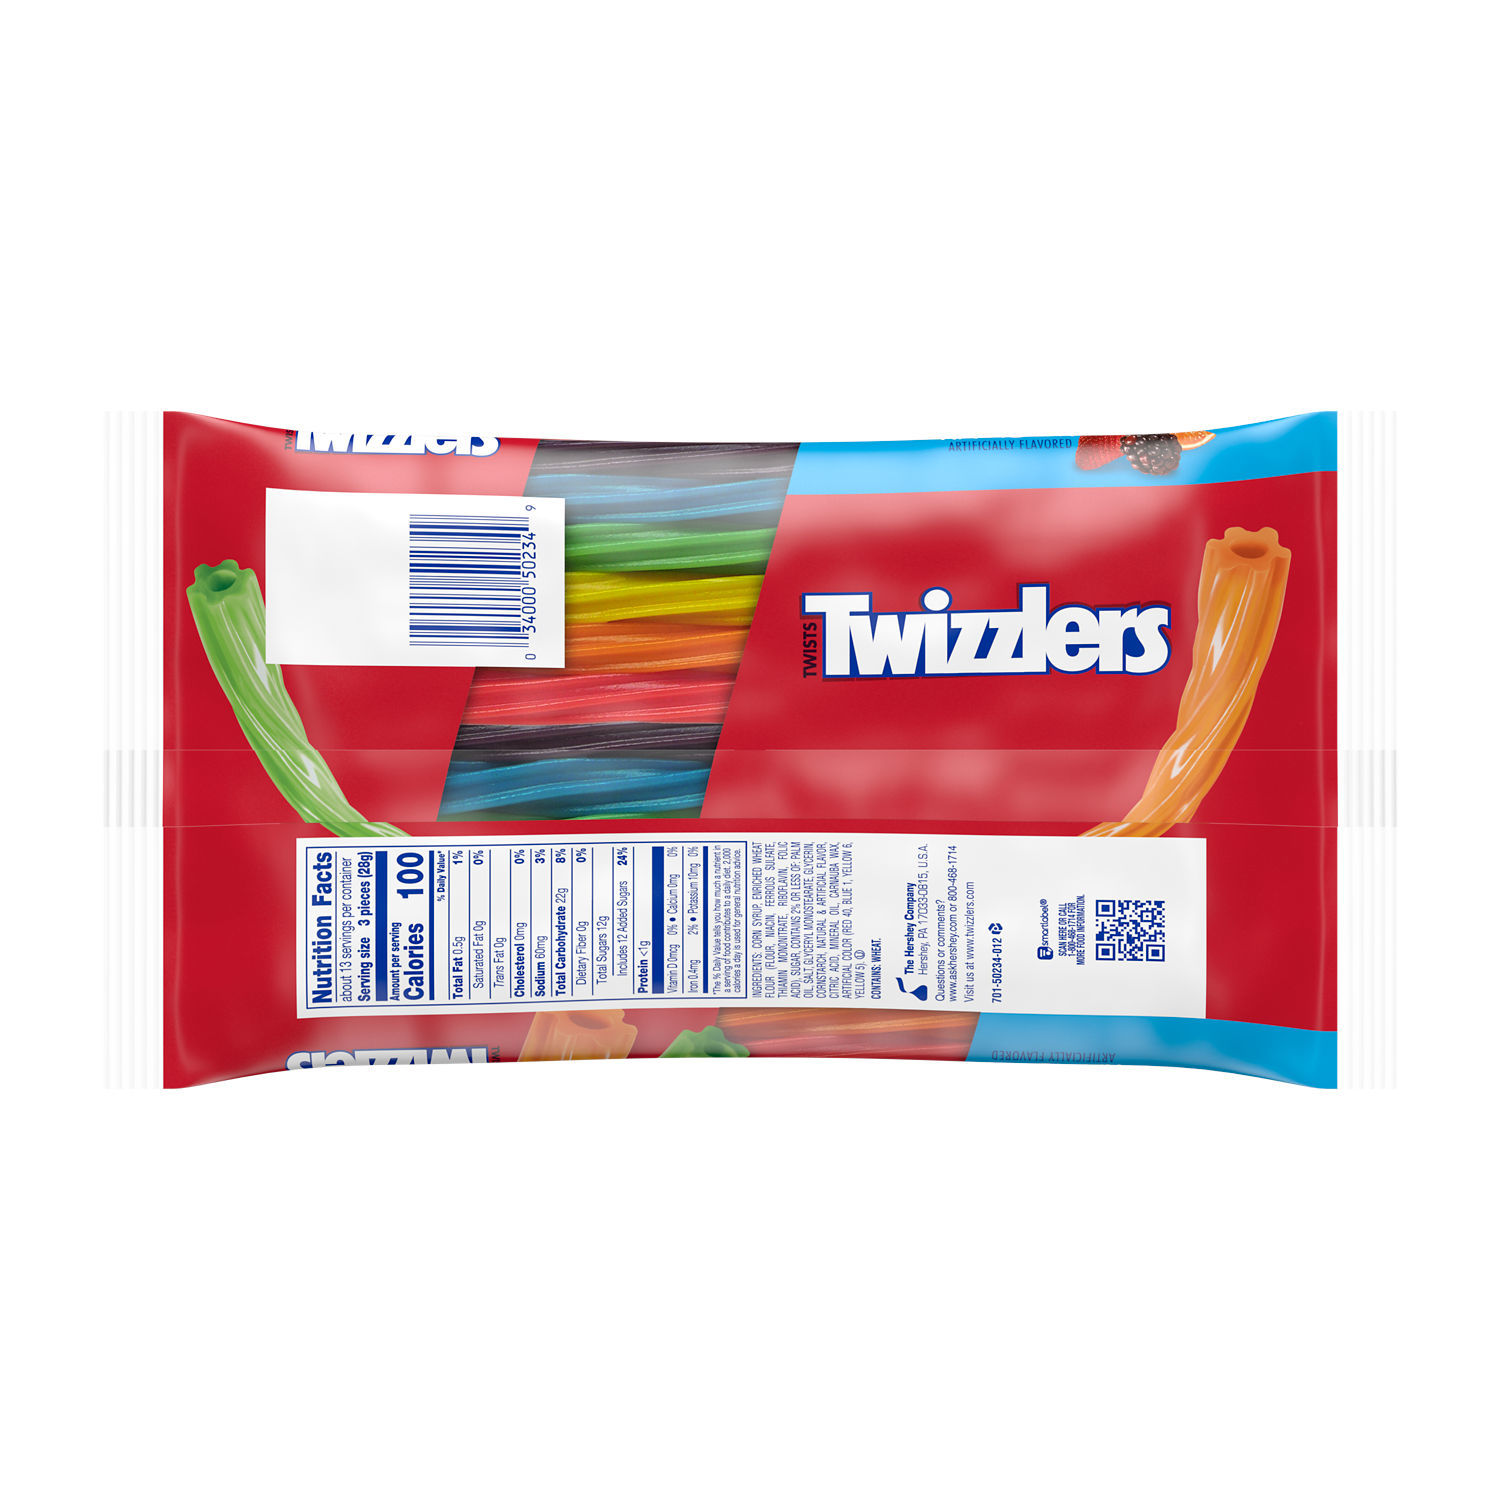 Twizzlers Twists Rainbow Flavored Licorice Style Candy, Bag 12.4 oz - image 2 of 8